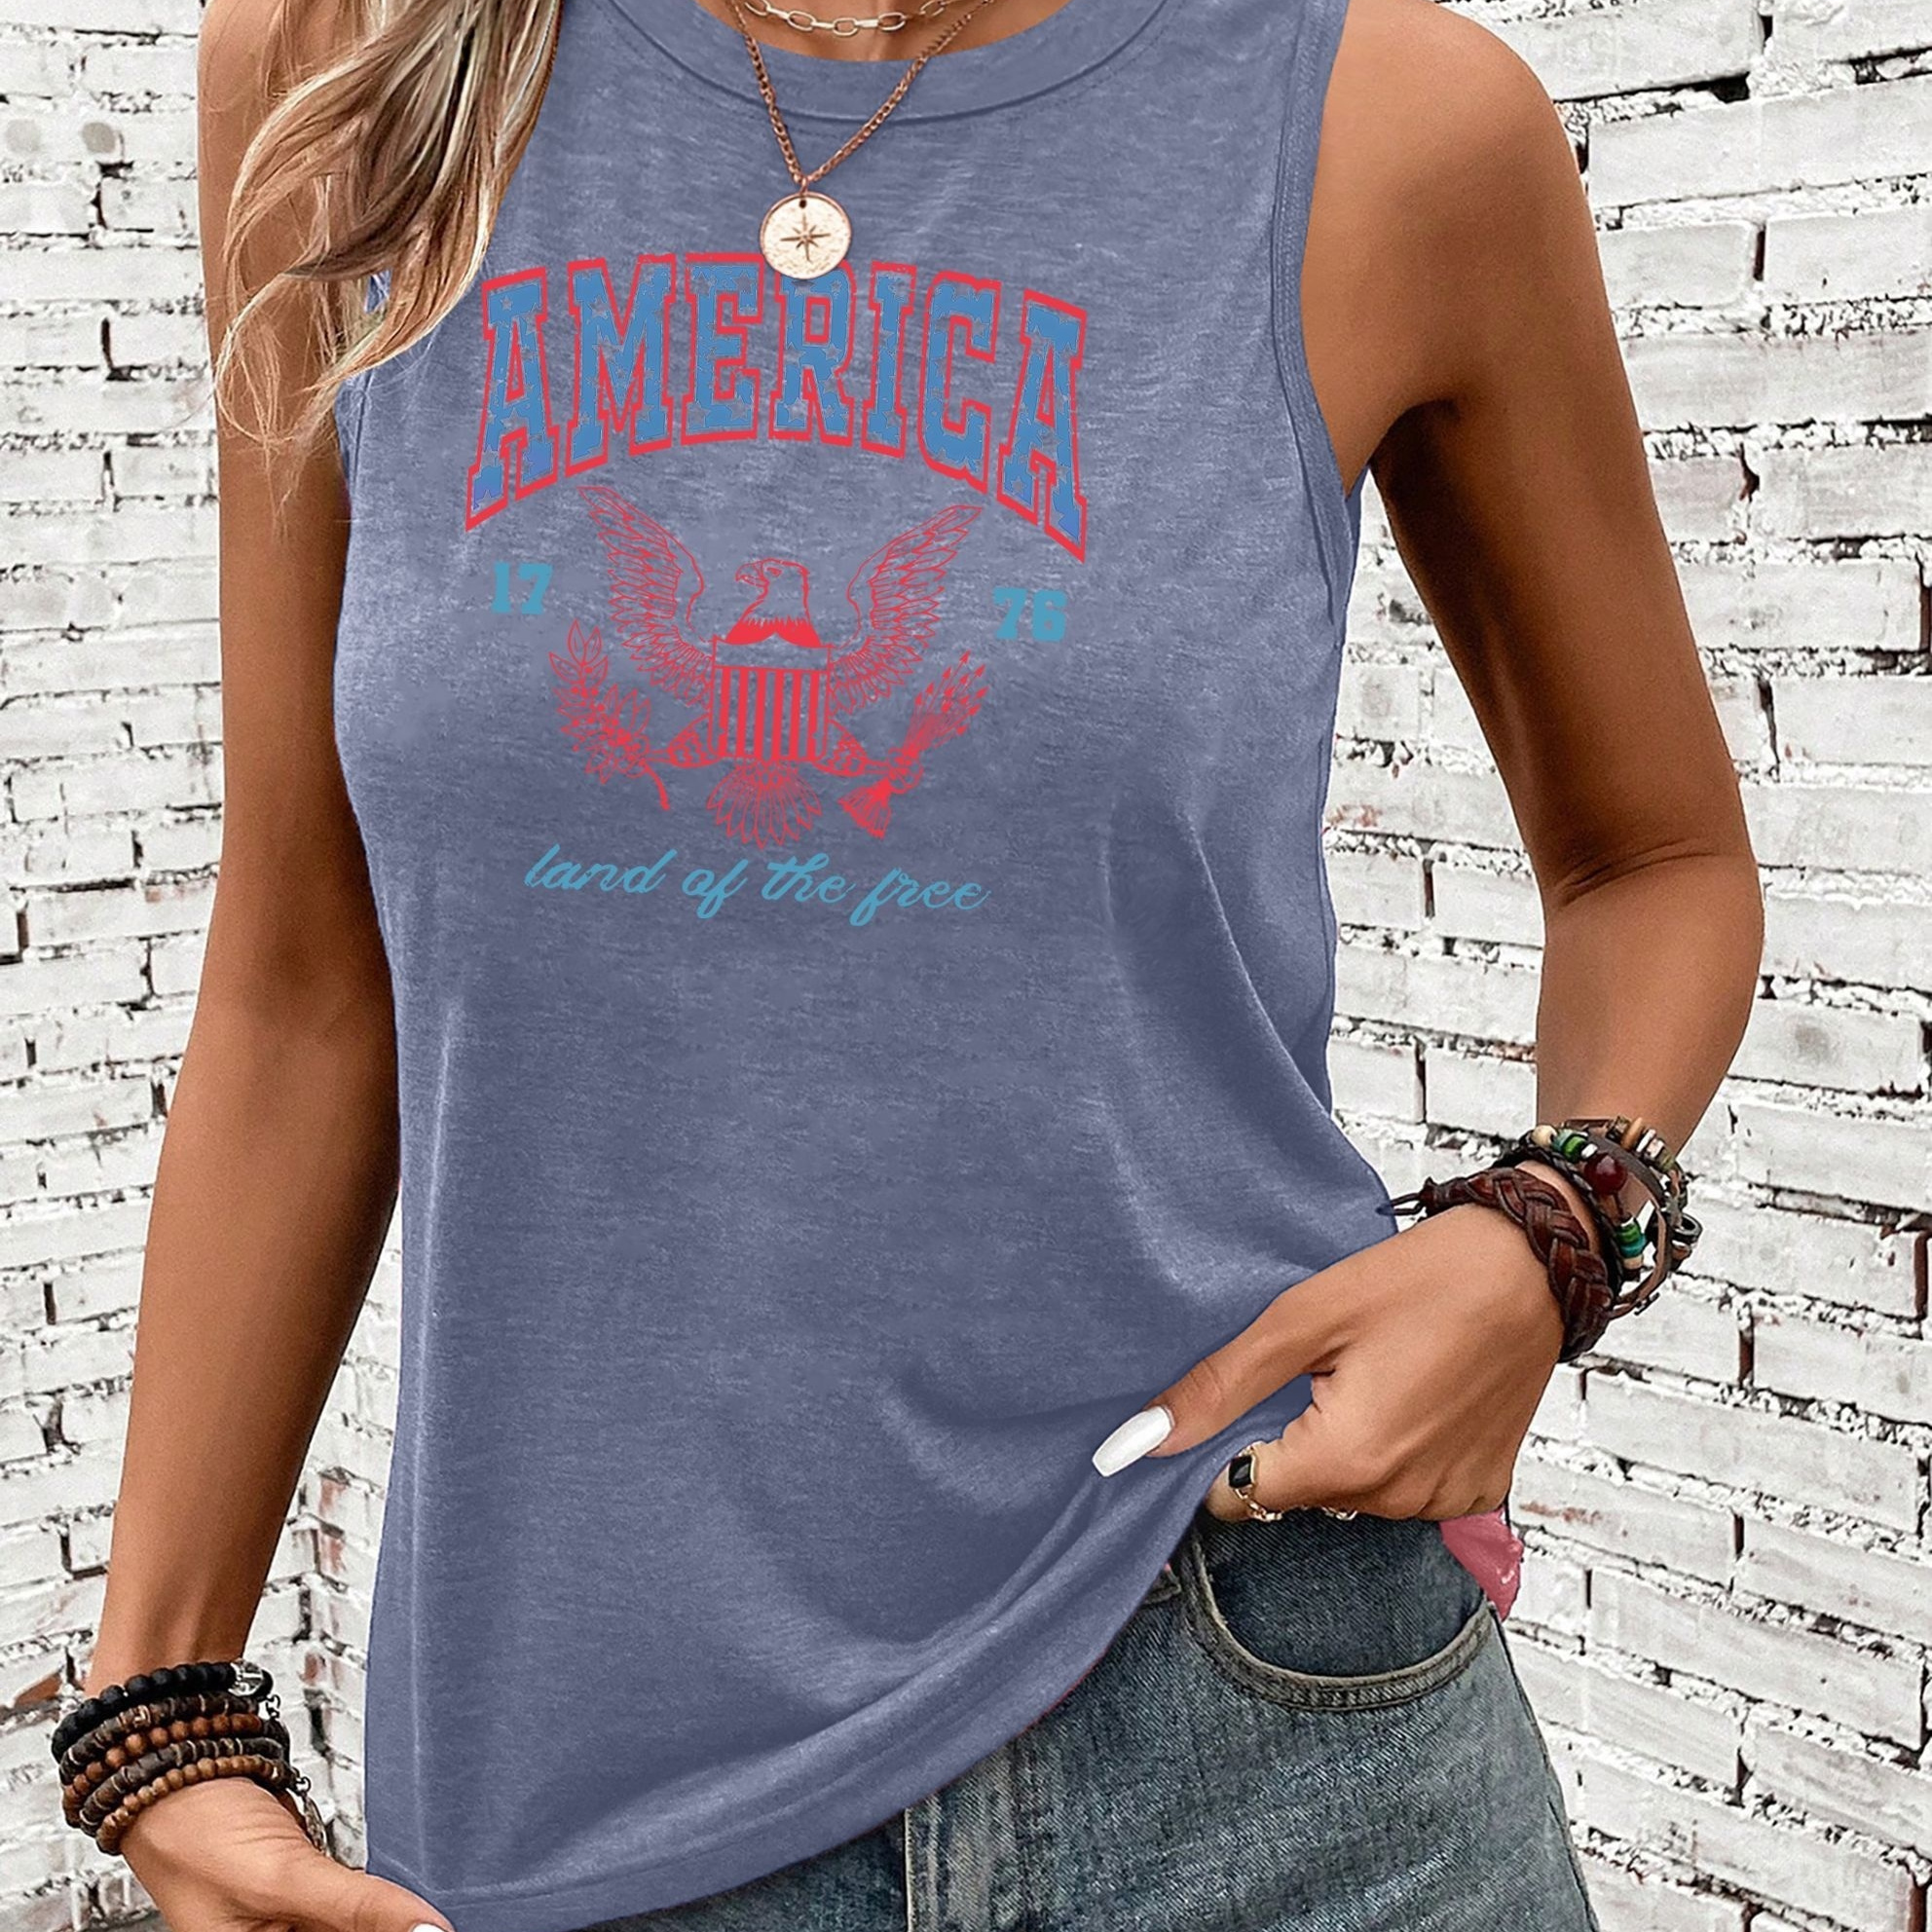 

America Print Tank Top, Sleeveless Casual Top For Summer & Spring, Women's Clothing